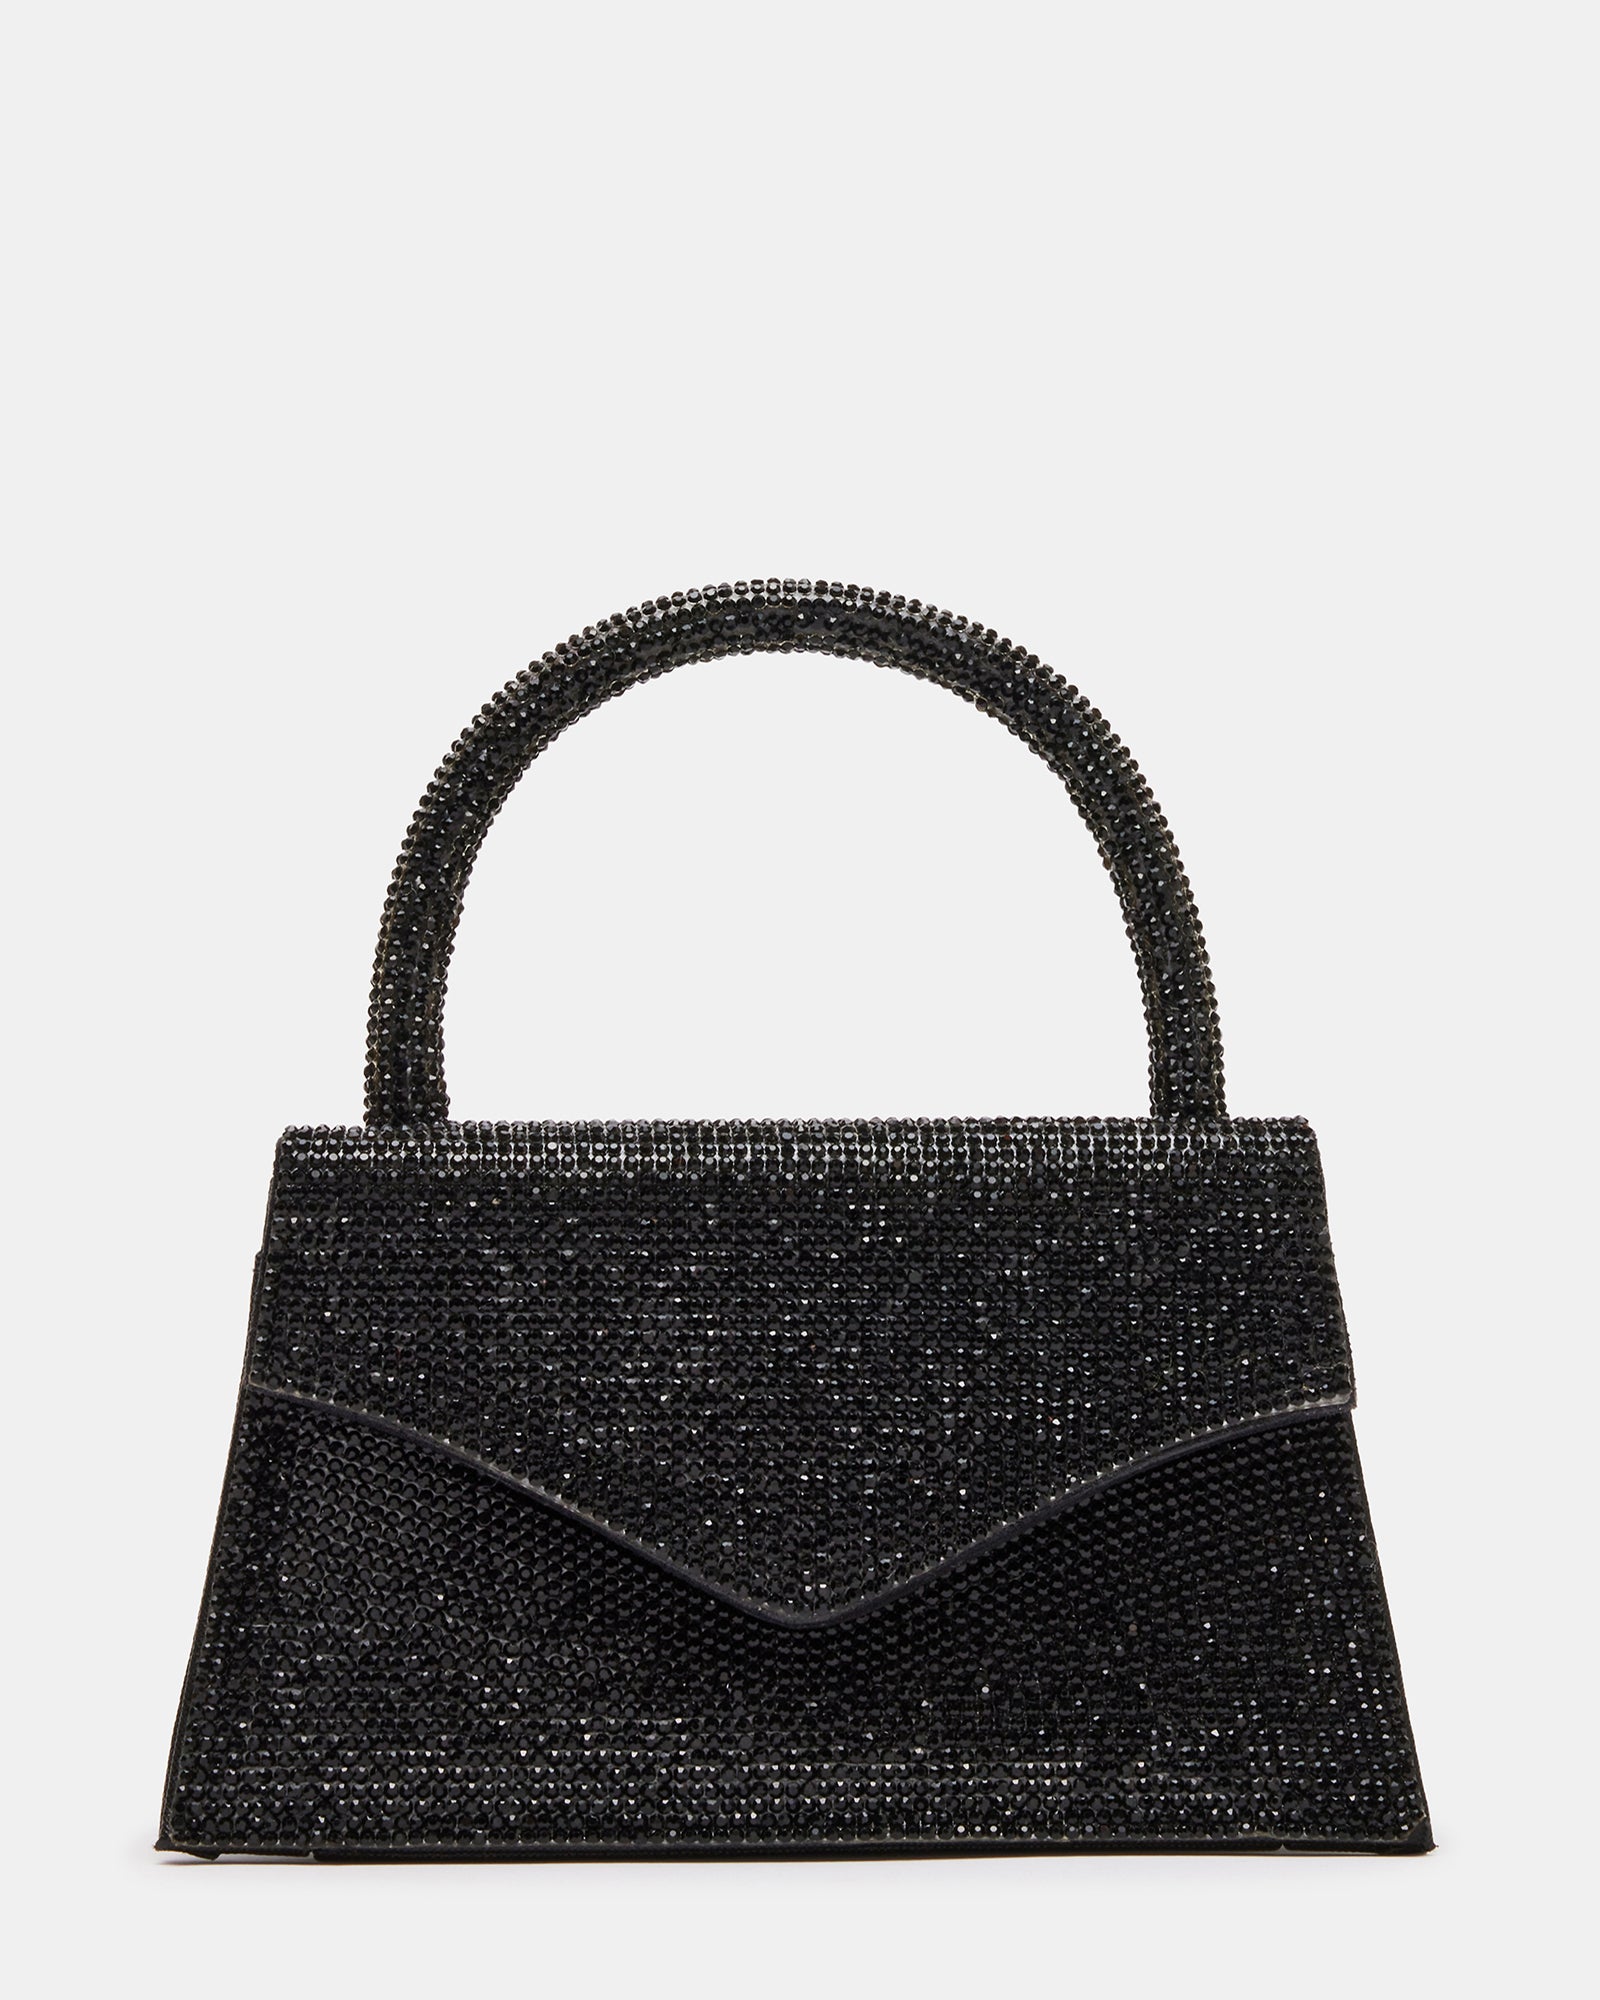 Designer Marquess Sequin Bling Dinner Black Cross Body Bag With Crystal  Logo Letters And Top Handle Alex Ander Wang Satin Seamless Clutch Purse For  Women From Lvvl_bag, $56.99 | DHgate.Com